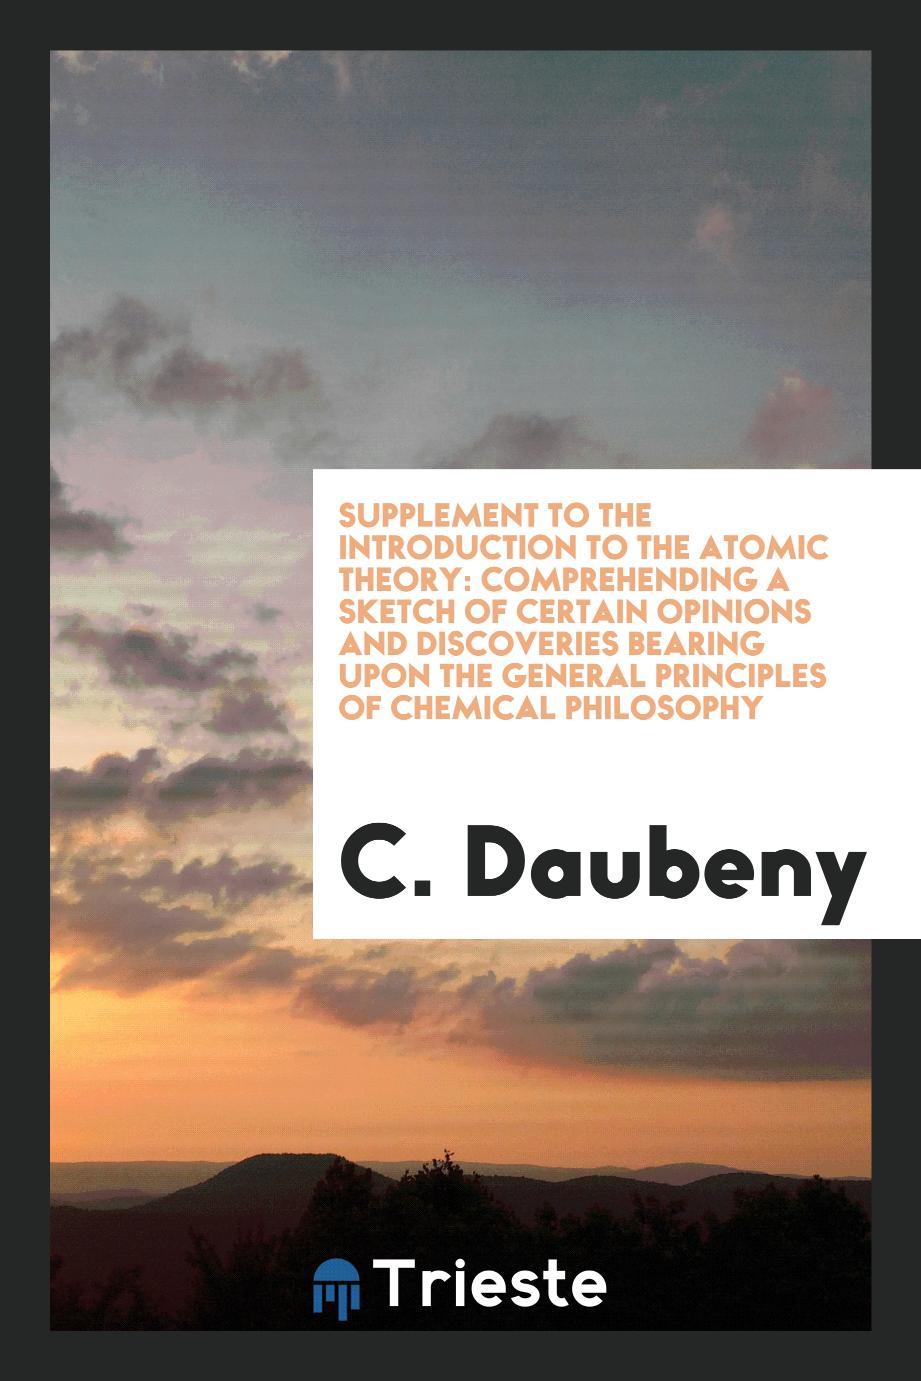 Supplement to the Introduction to the atomic theory: comprehending a sketch of certain opinions and discoveries bearing upon the General Principles of Chemical Philosophy